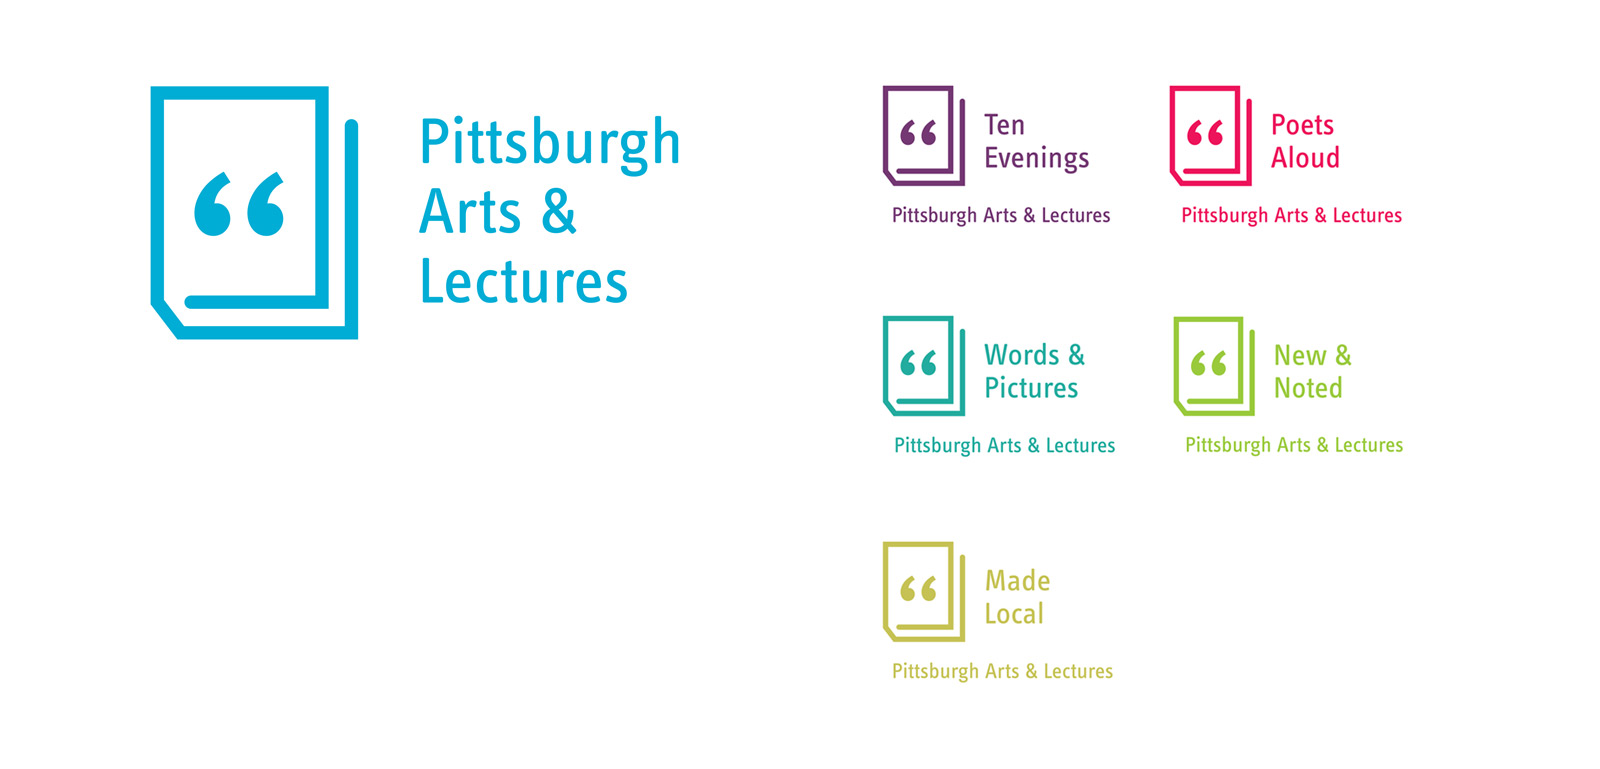 Pittsburgh Arts & Lectures logos